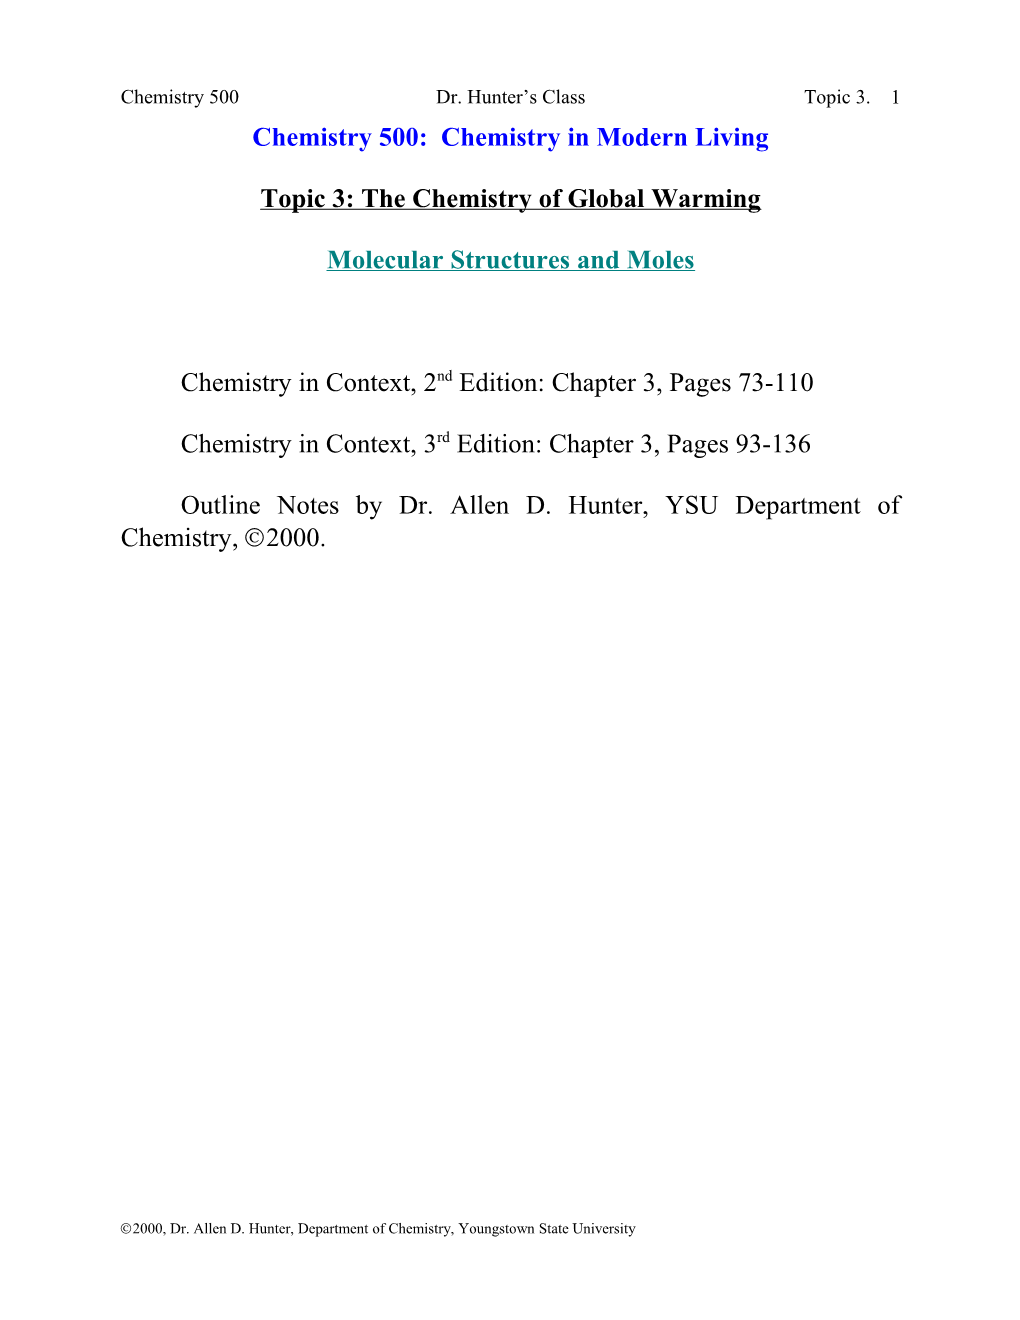 Topic 3: the Chemistry of Global Warming